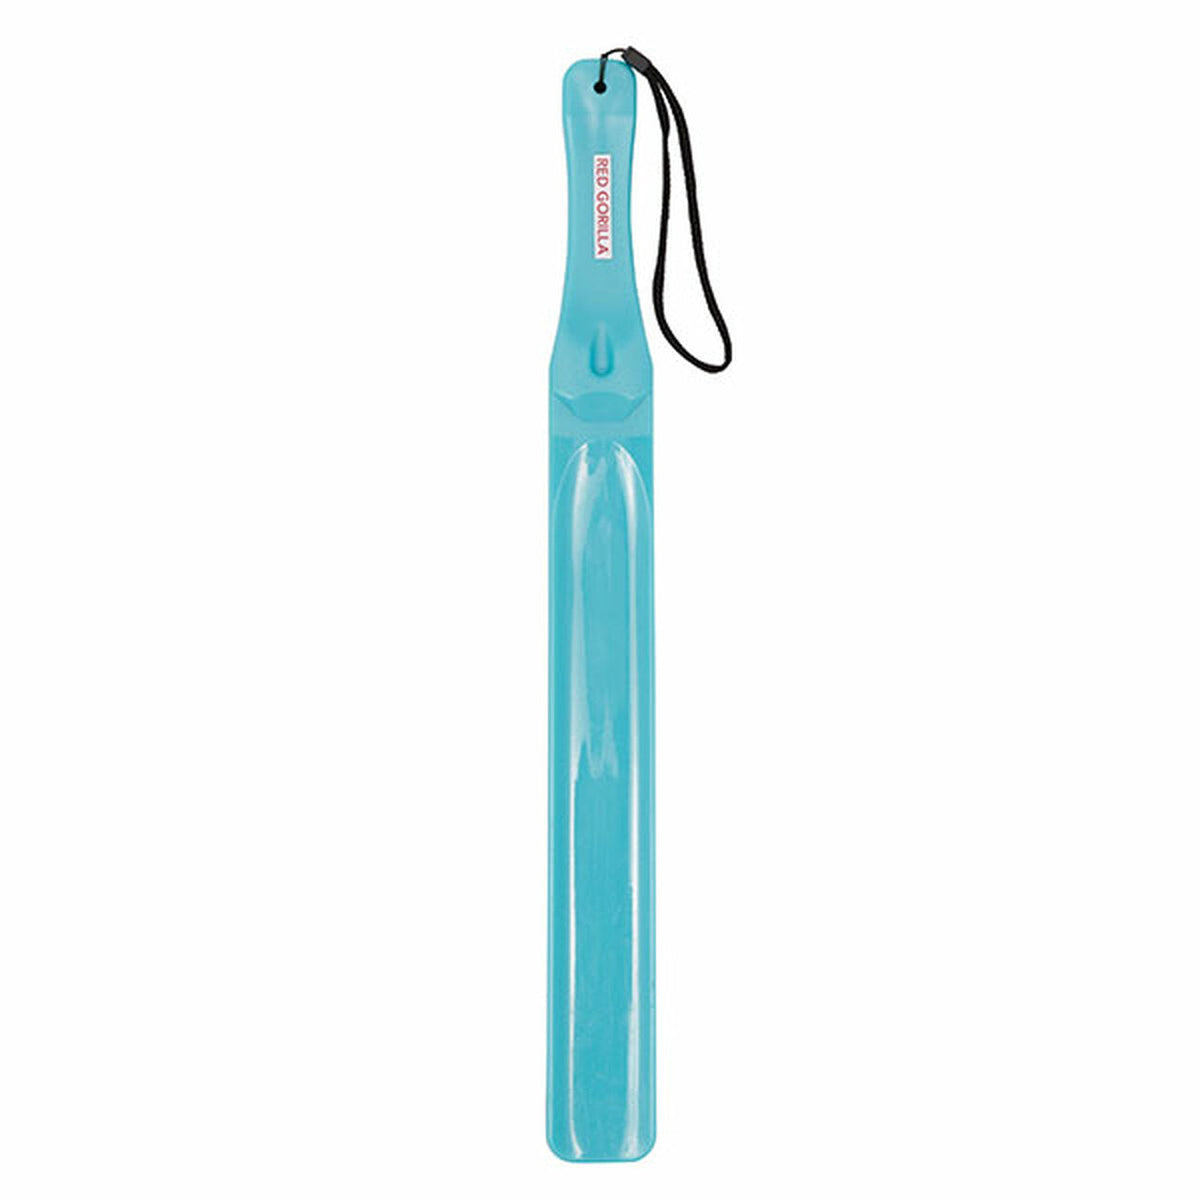 Light blue plastic stirrer, narrowed at the handle with black hand loop.